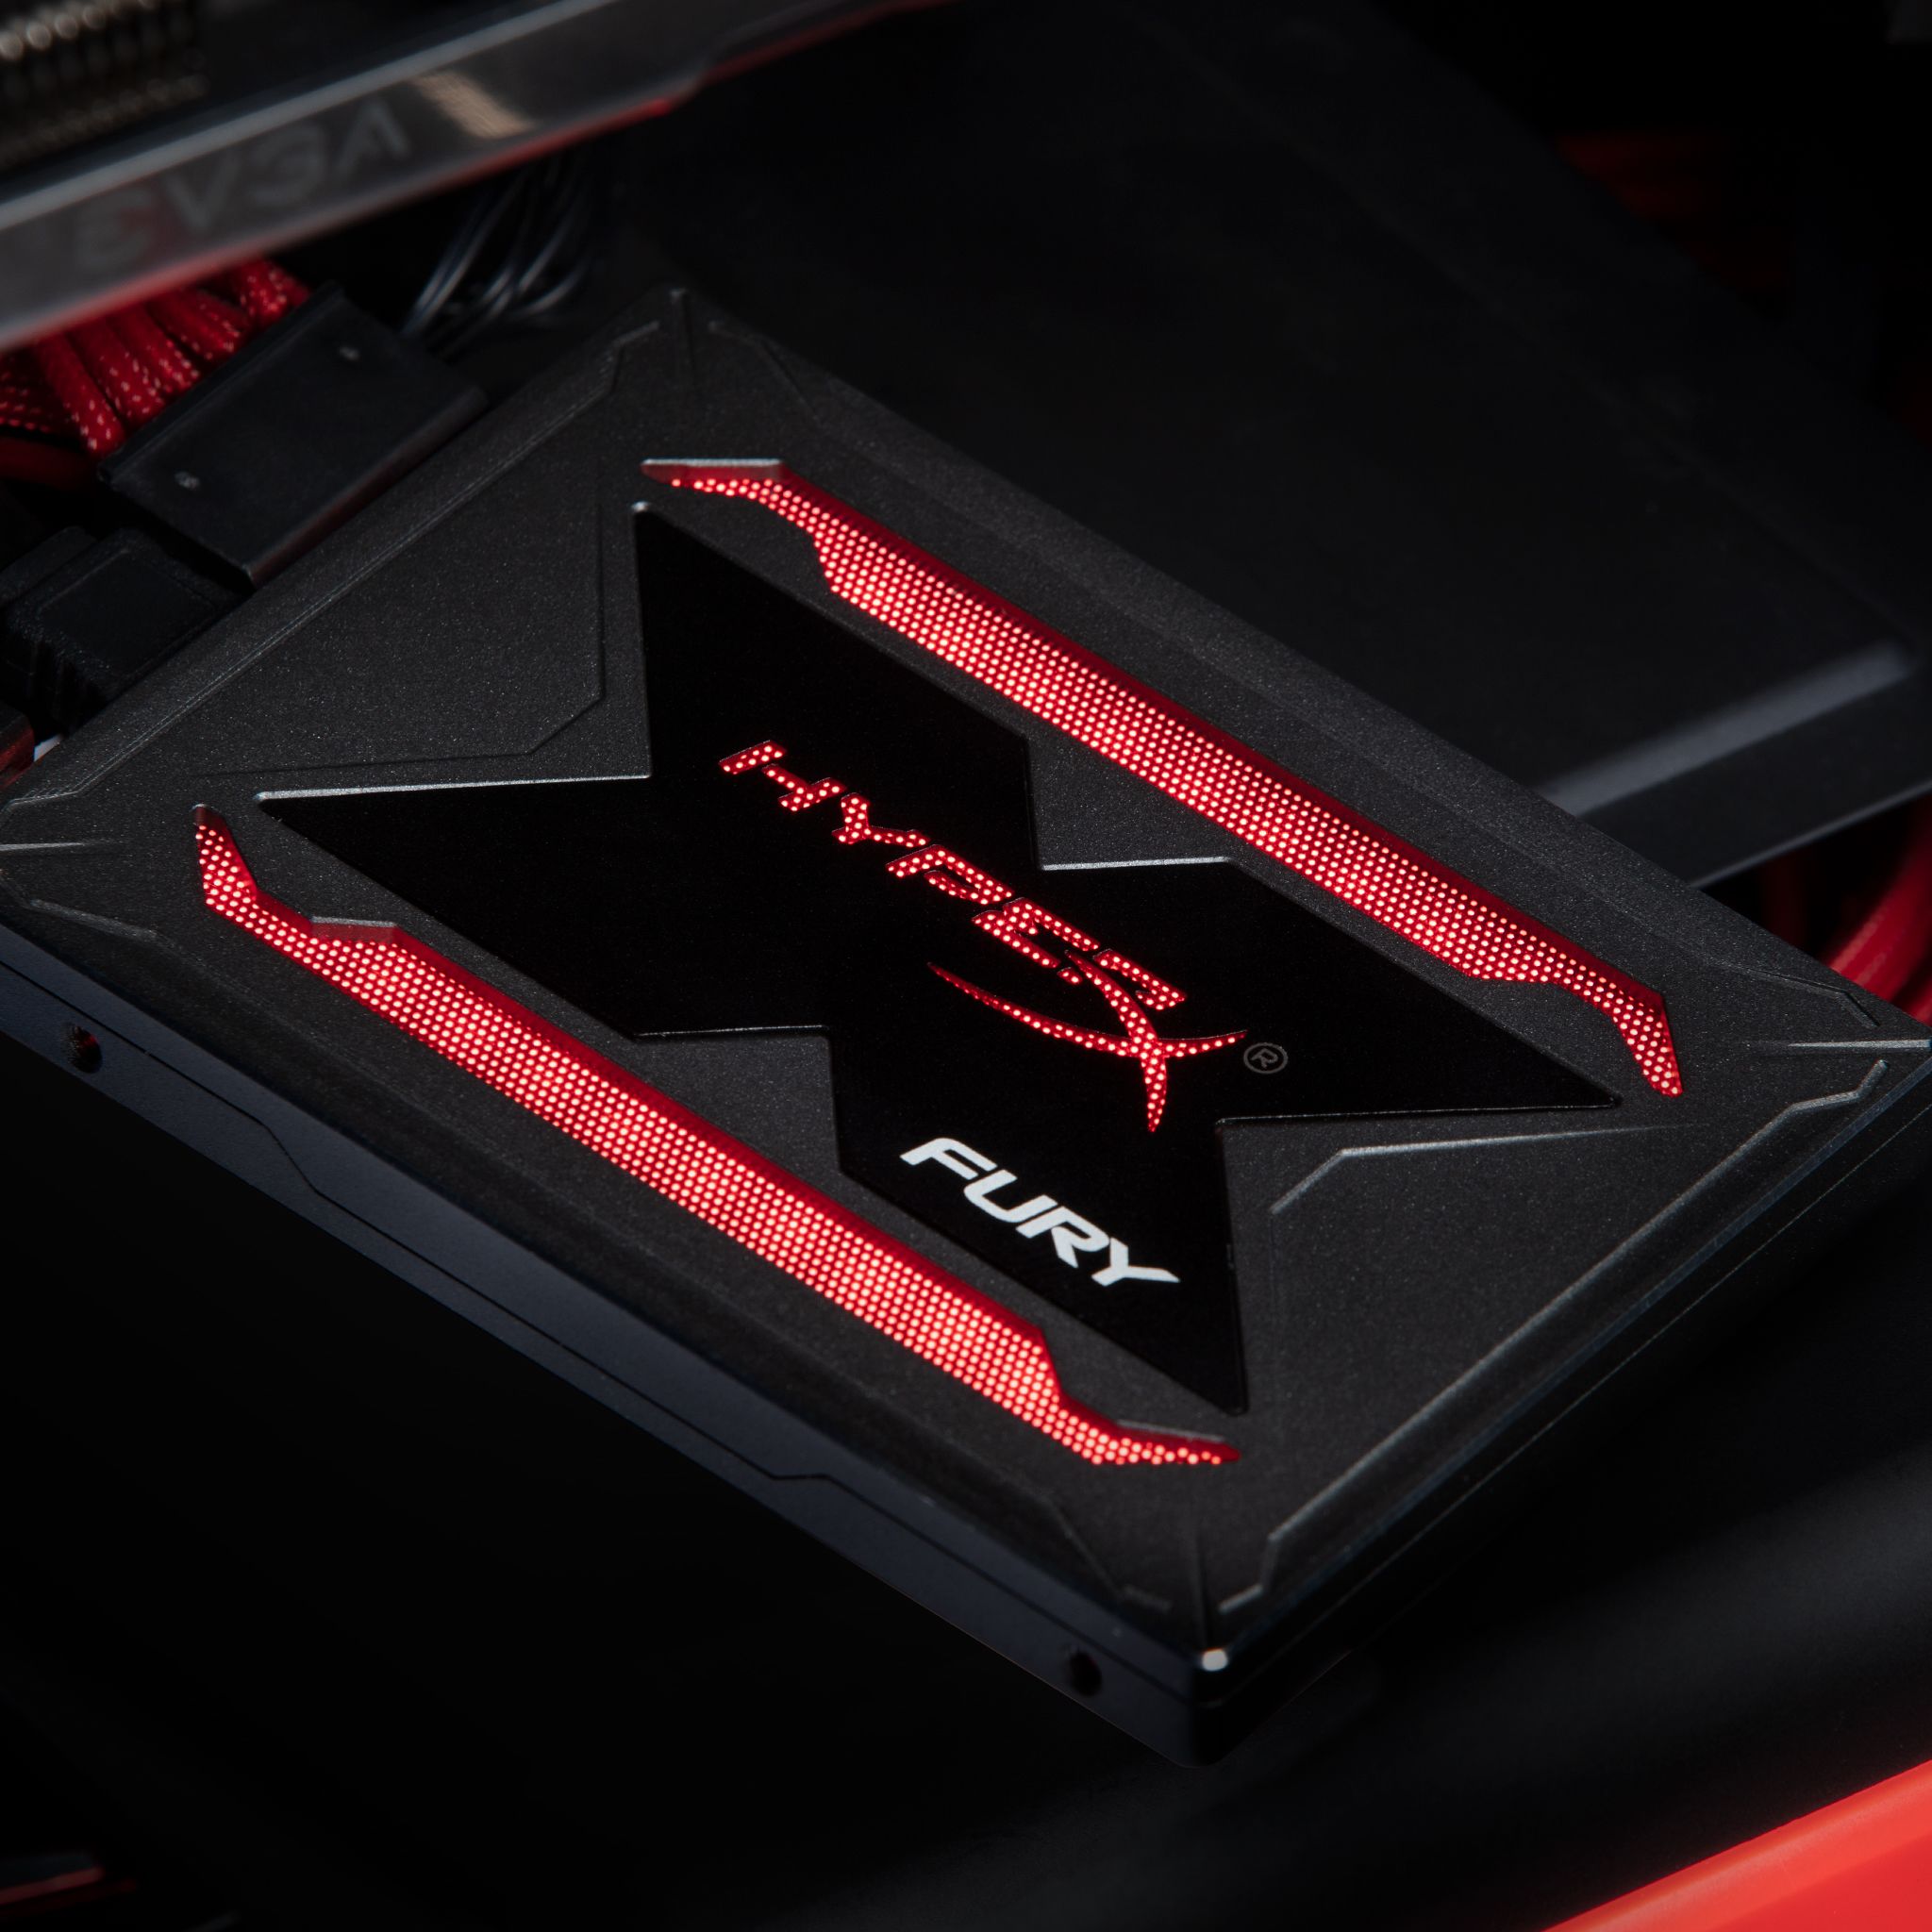 New affordable SSD HyperX Fury 3D with a capacity of 240 GB